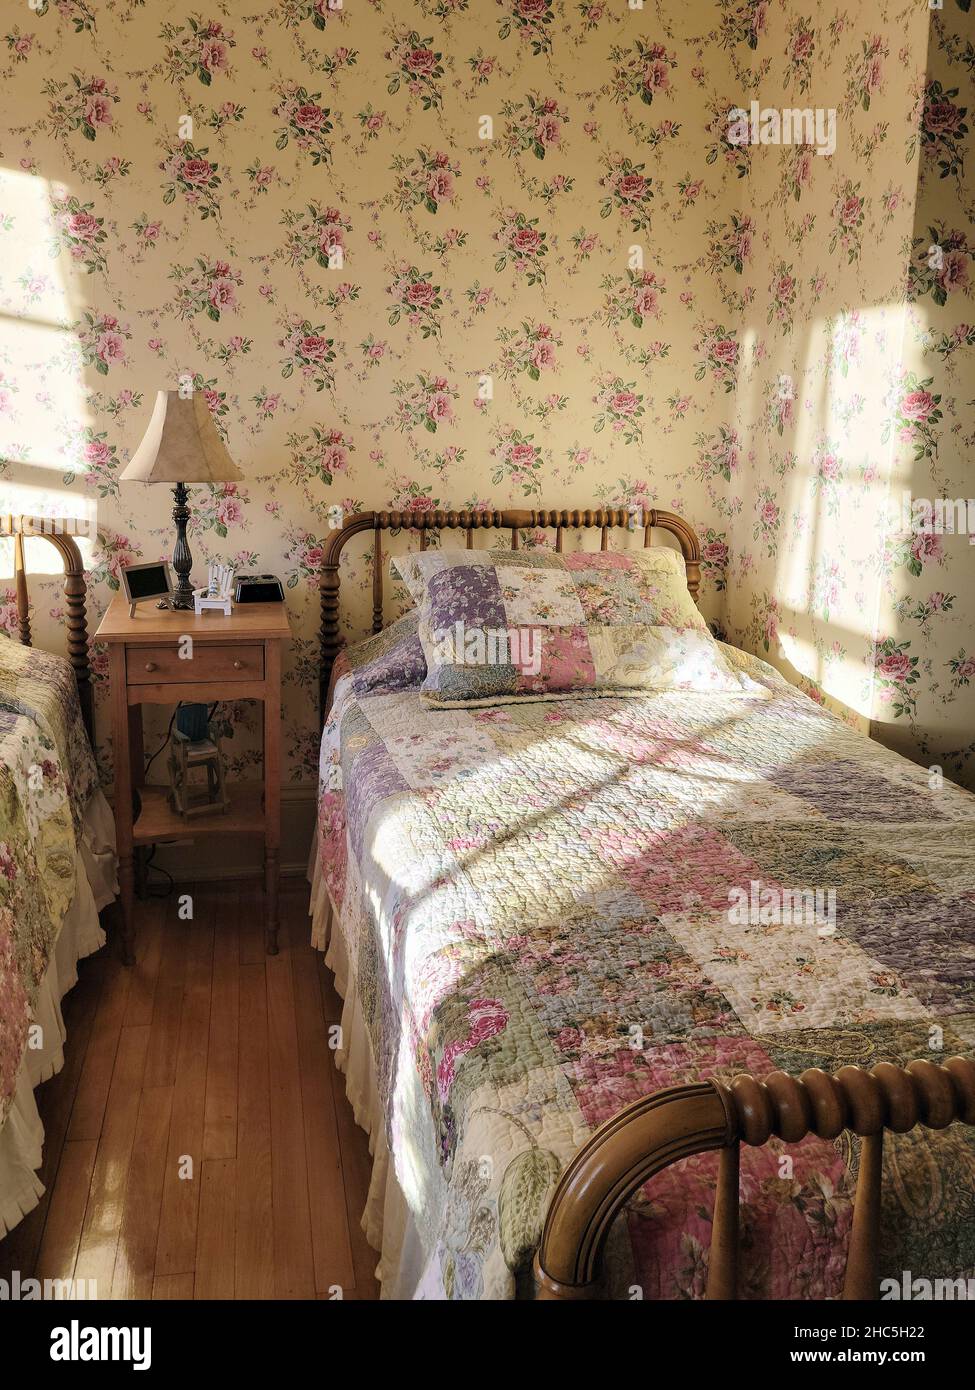 Sunlight window pattern on vintage bed quilt and wallpaper in an old-fashioned bedroom Stock Photo